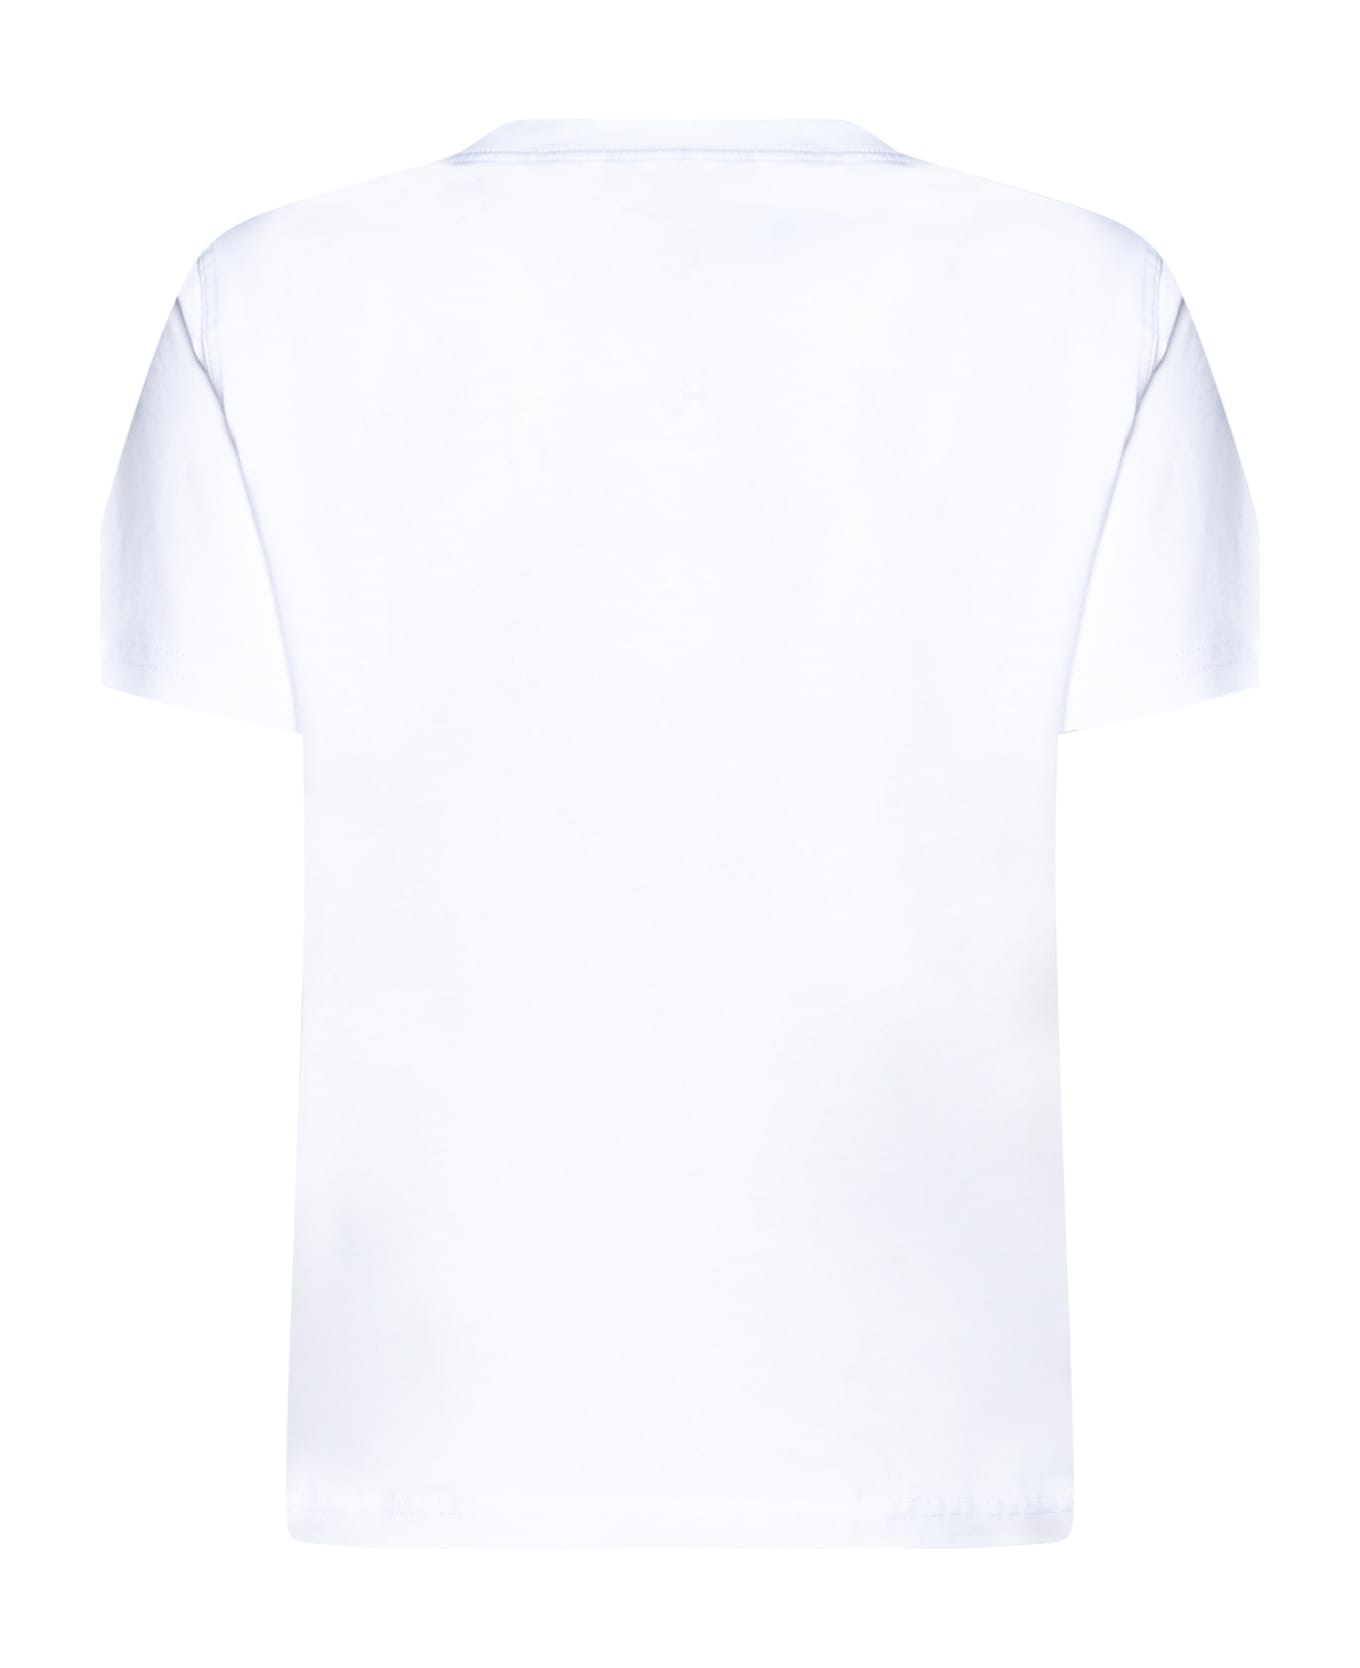 Versace Jeans Couture T-shirt - White/gold Tシャツ